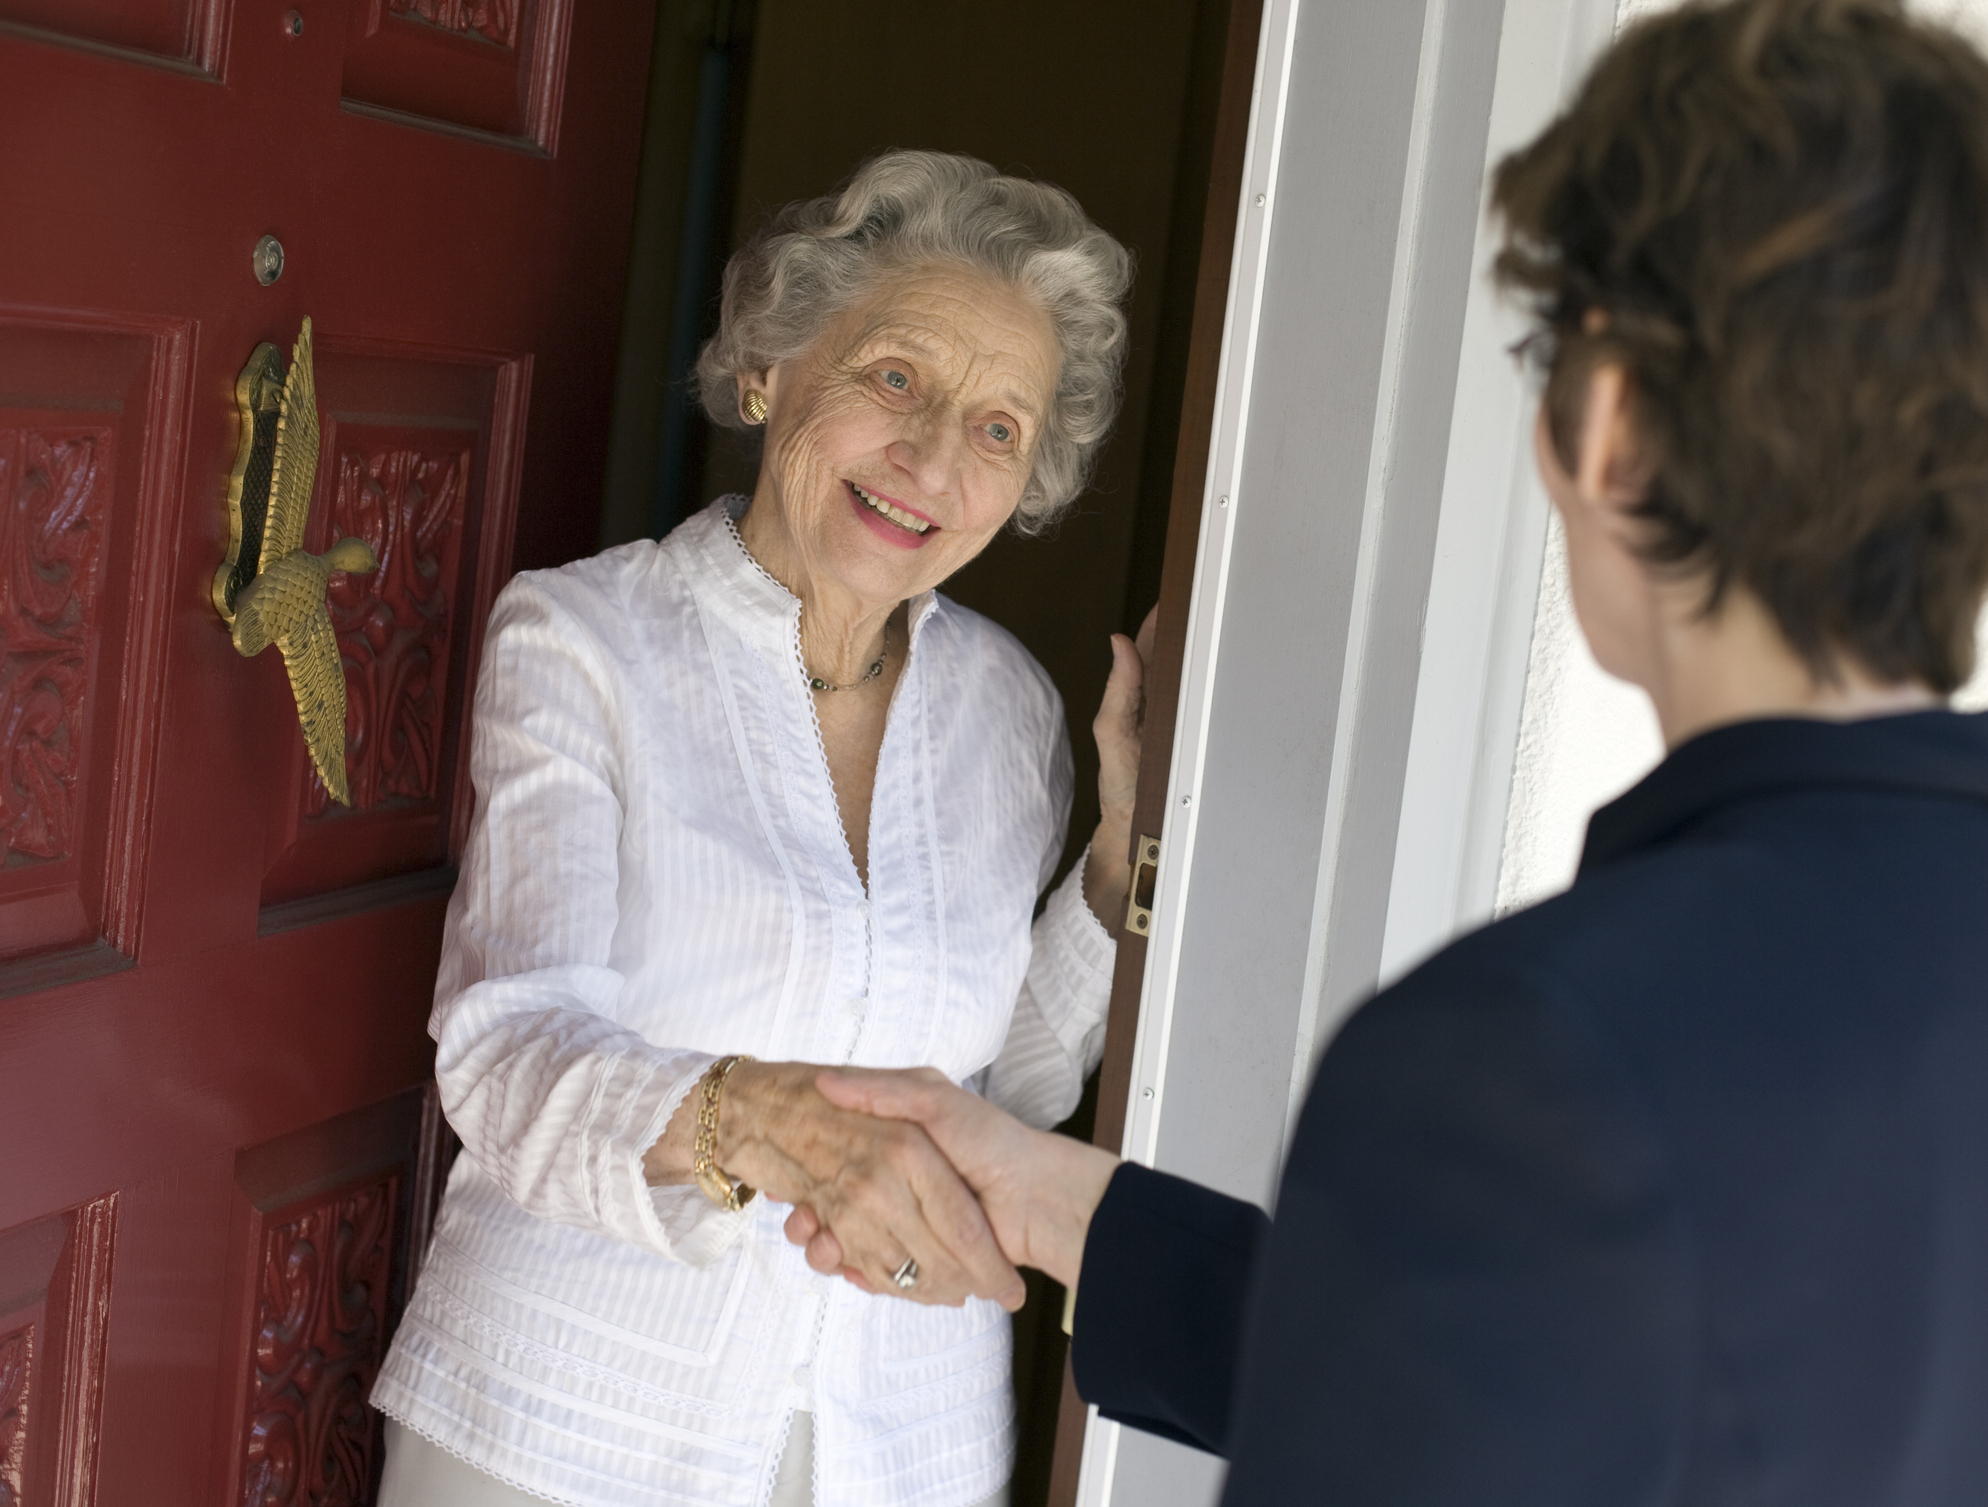 Older woman greets visitor at her doorway with a handshake and a smile